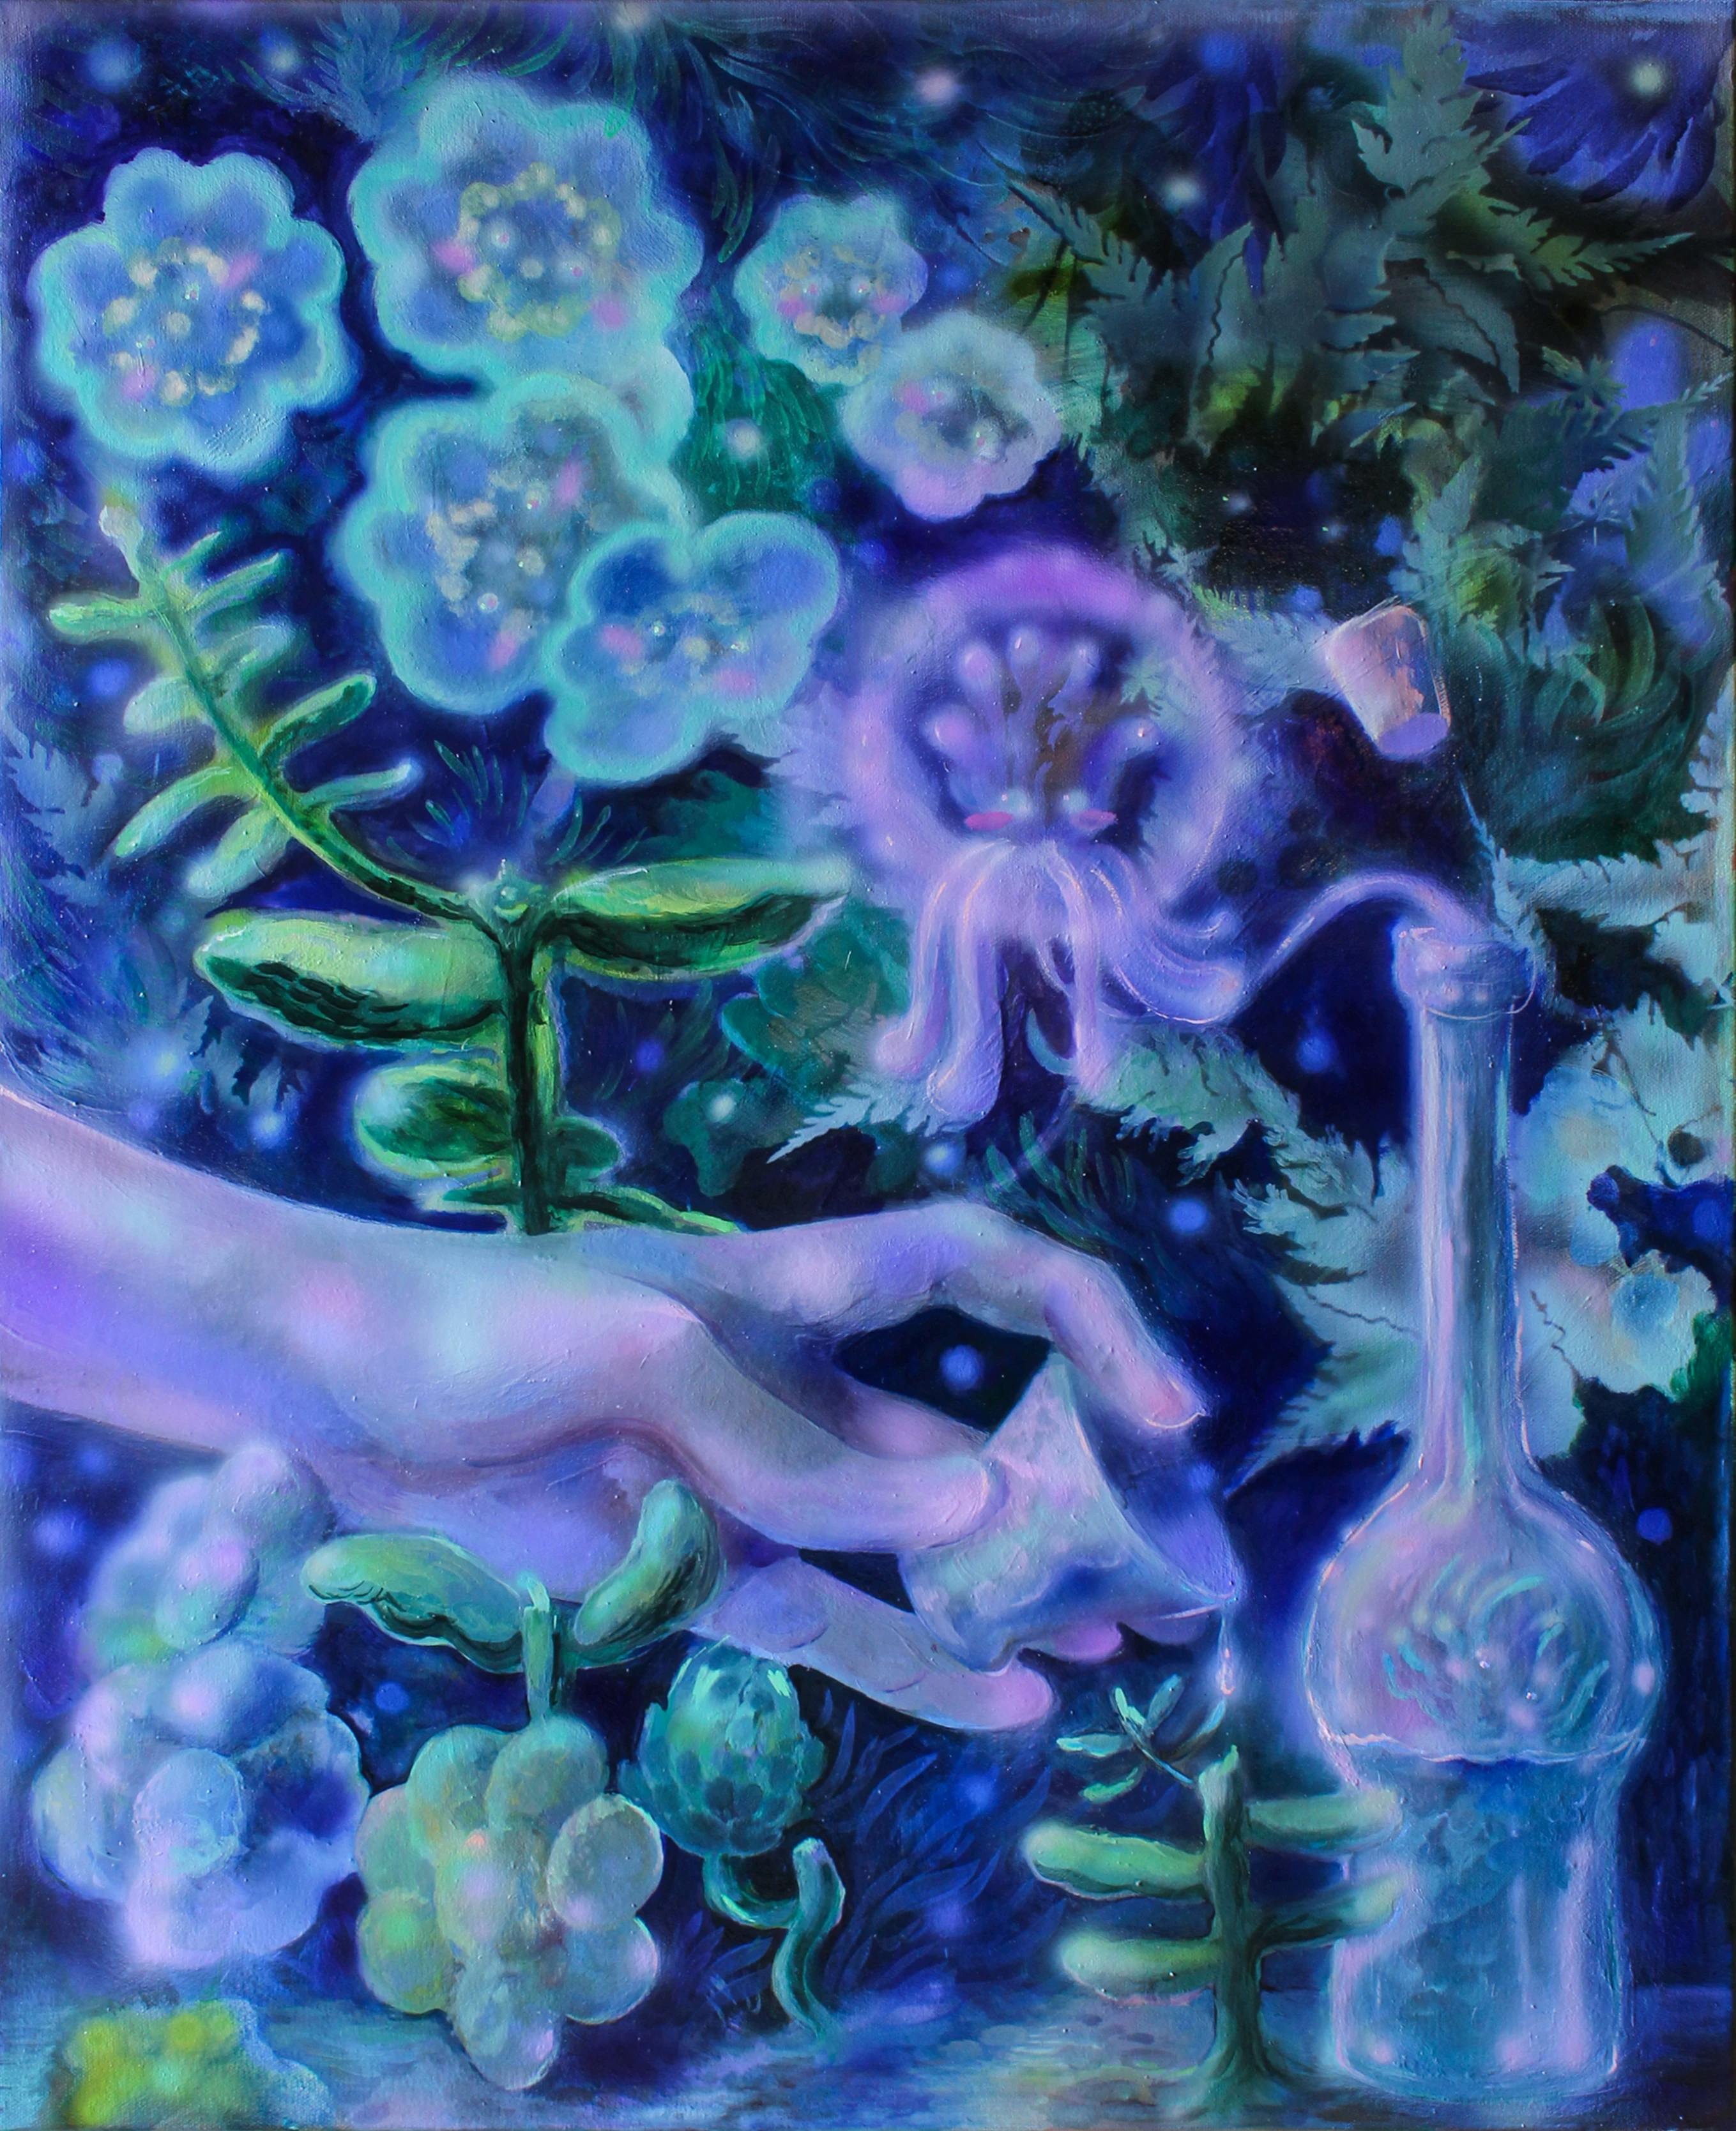 A blue and purple painting of a hand in a garden by Nefertiti Jenkins.